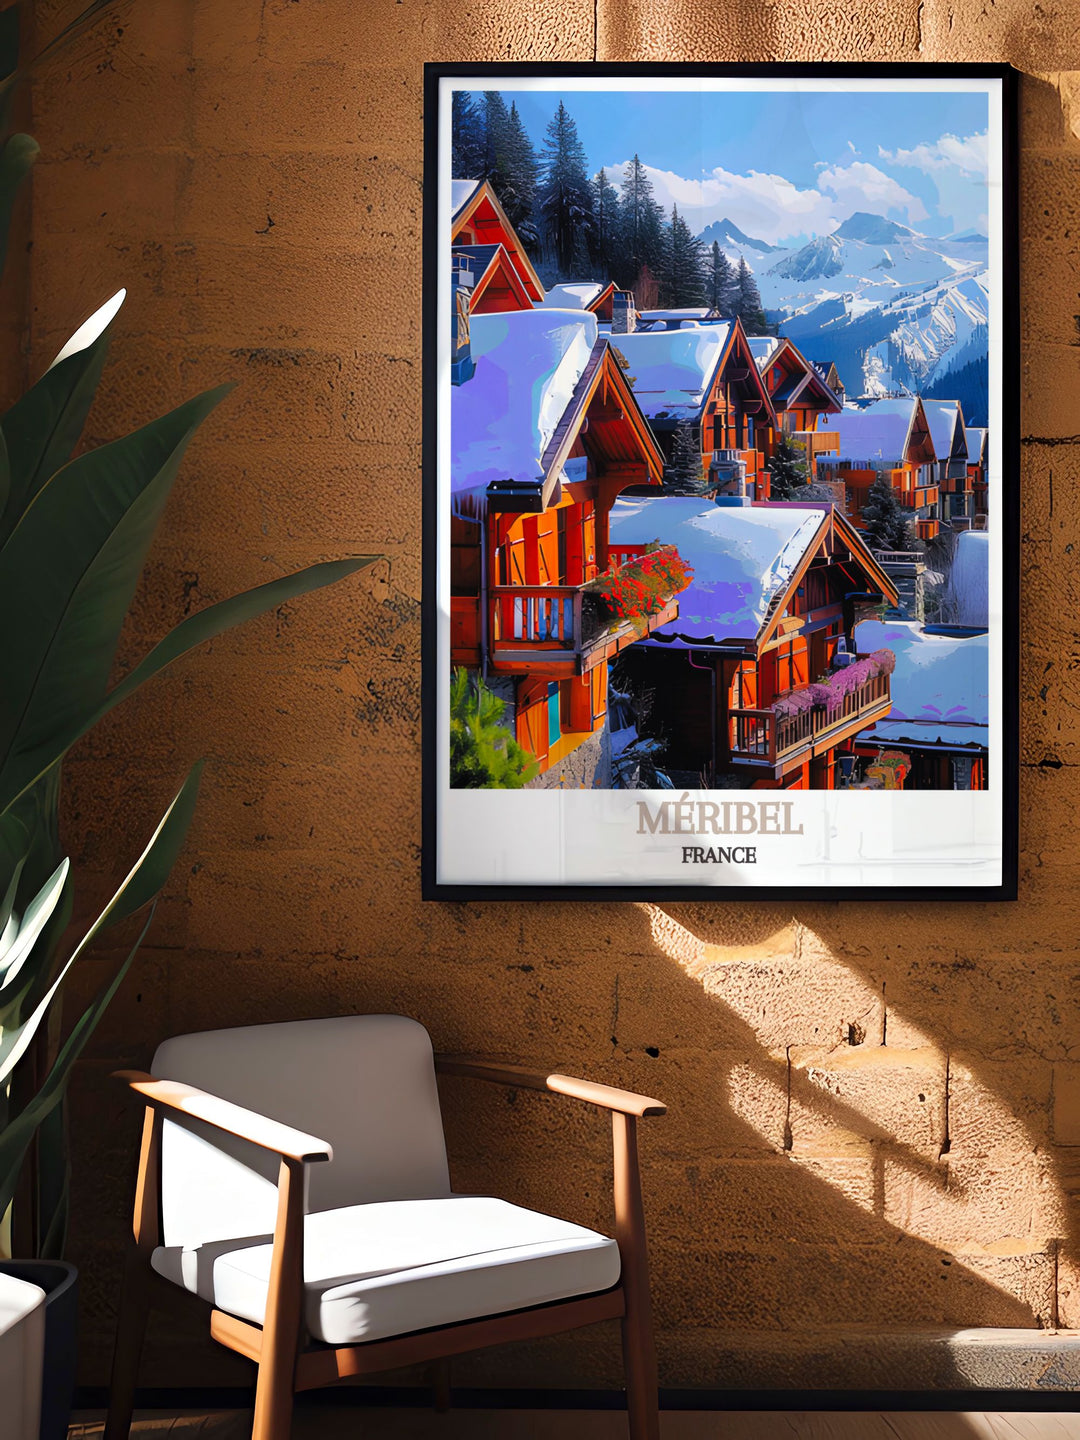 Featuring the iconic slopes and charming village of Méribel, this poster showcases the resorts inviting landscapes, perfect for those who cherish winter sports and mountain living.